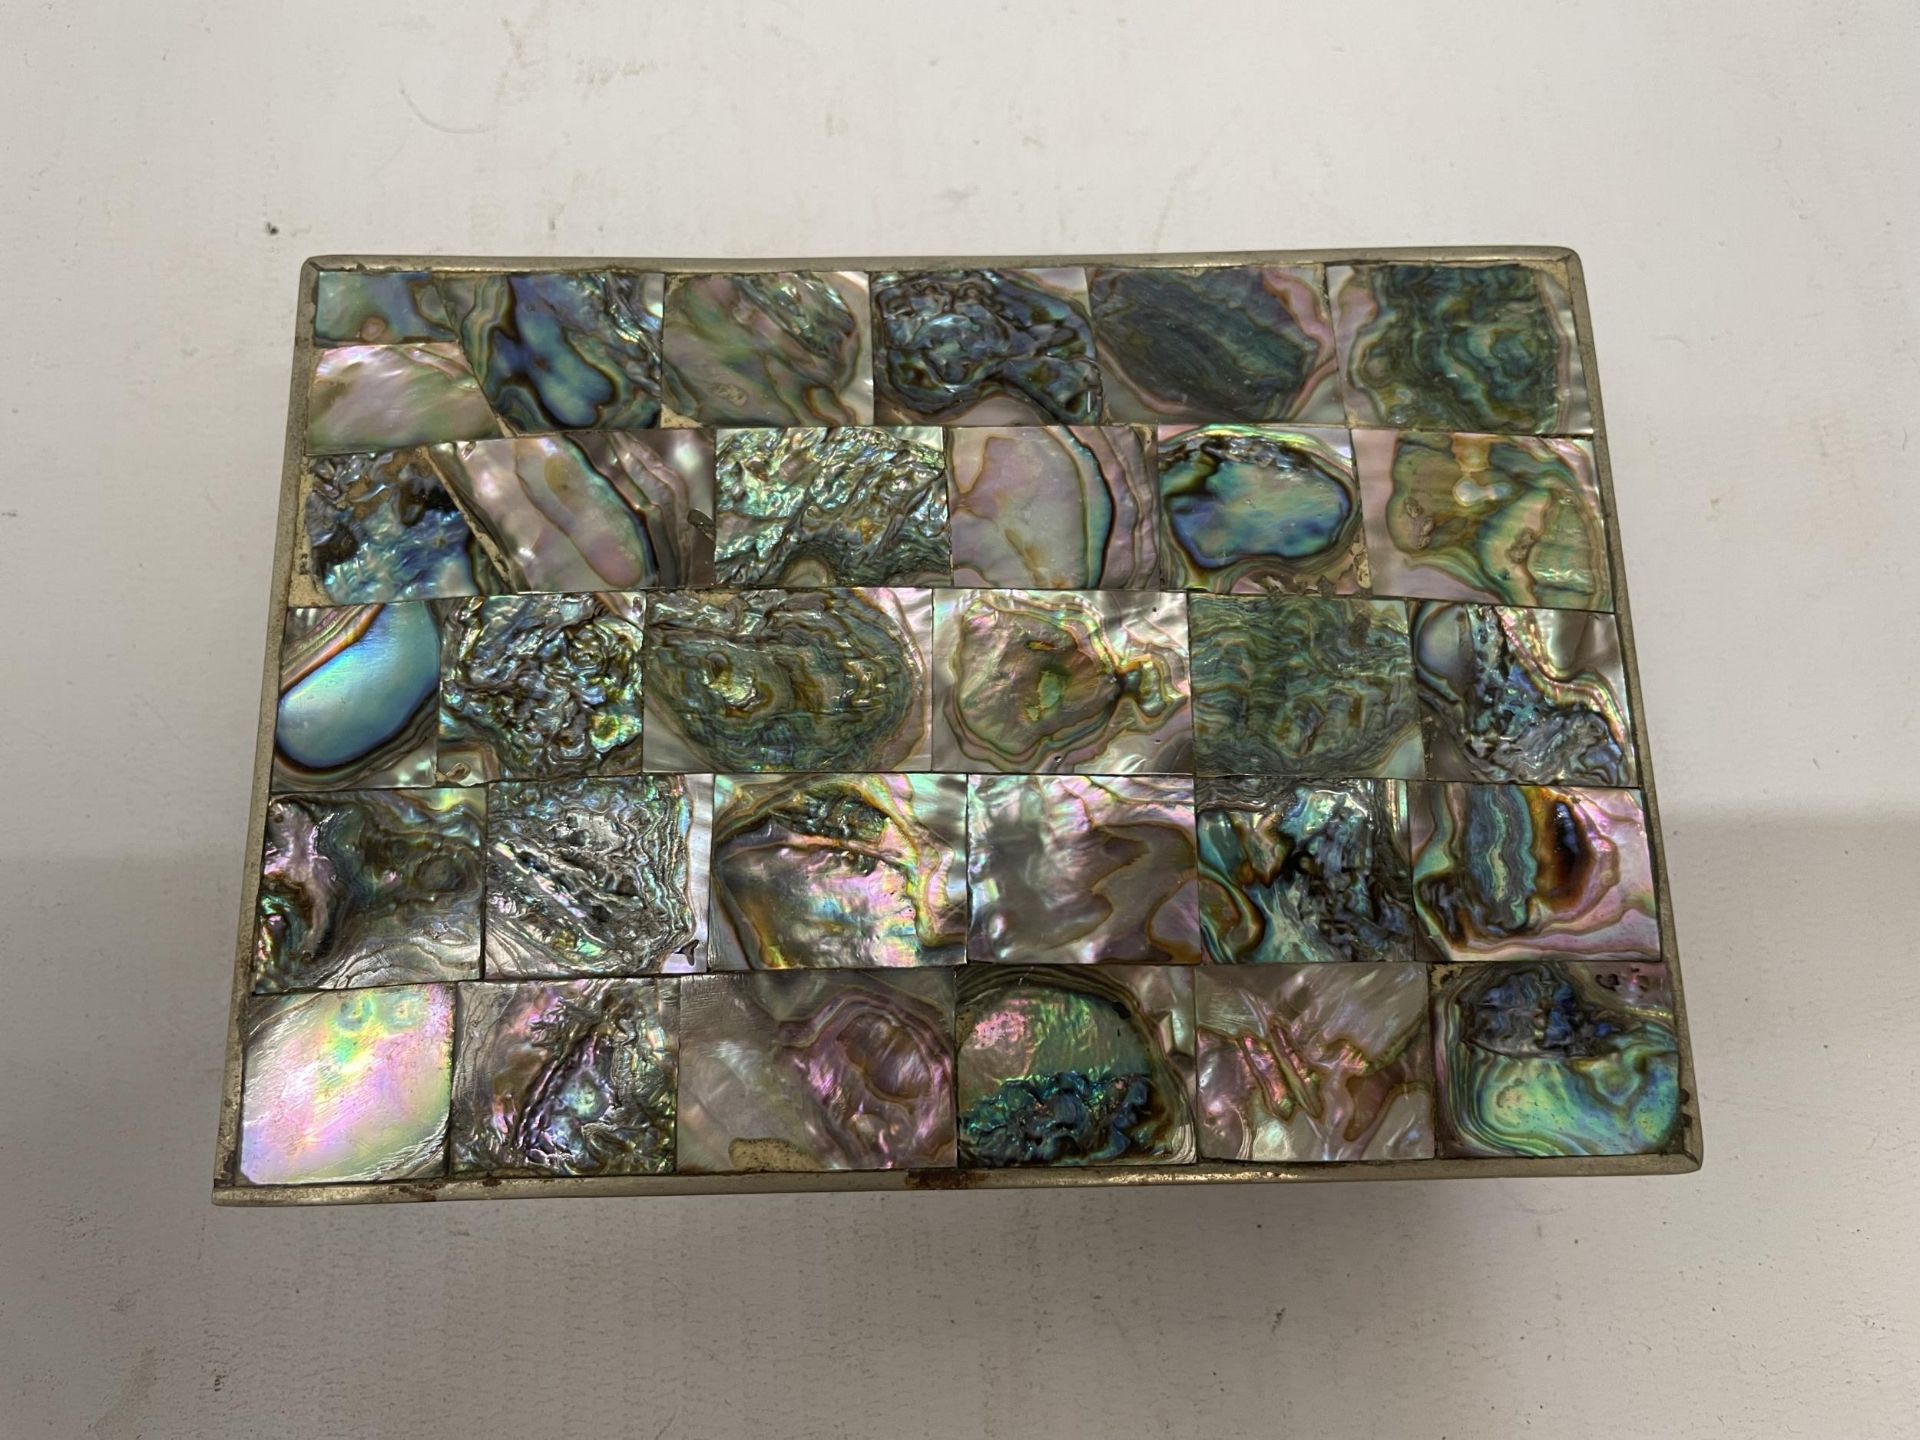 A MOTHER OF PEARL LIDDED JEWELLERY BOX - Image 2 of 4